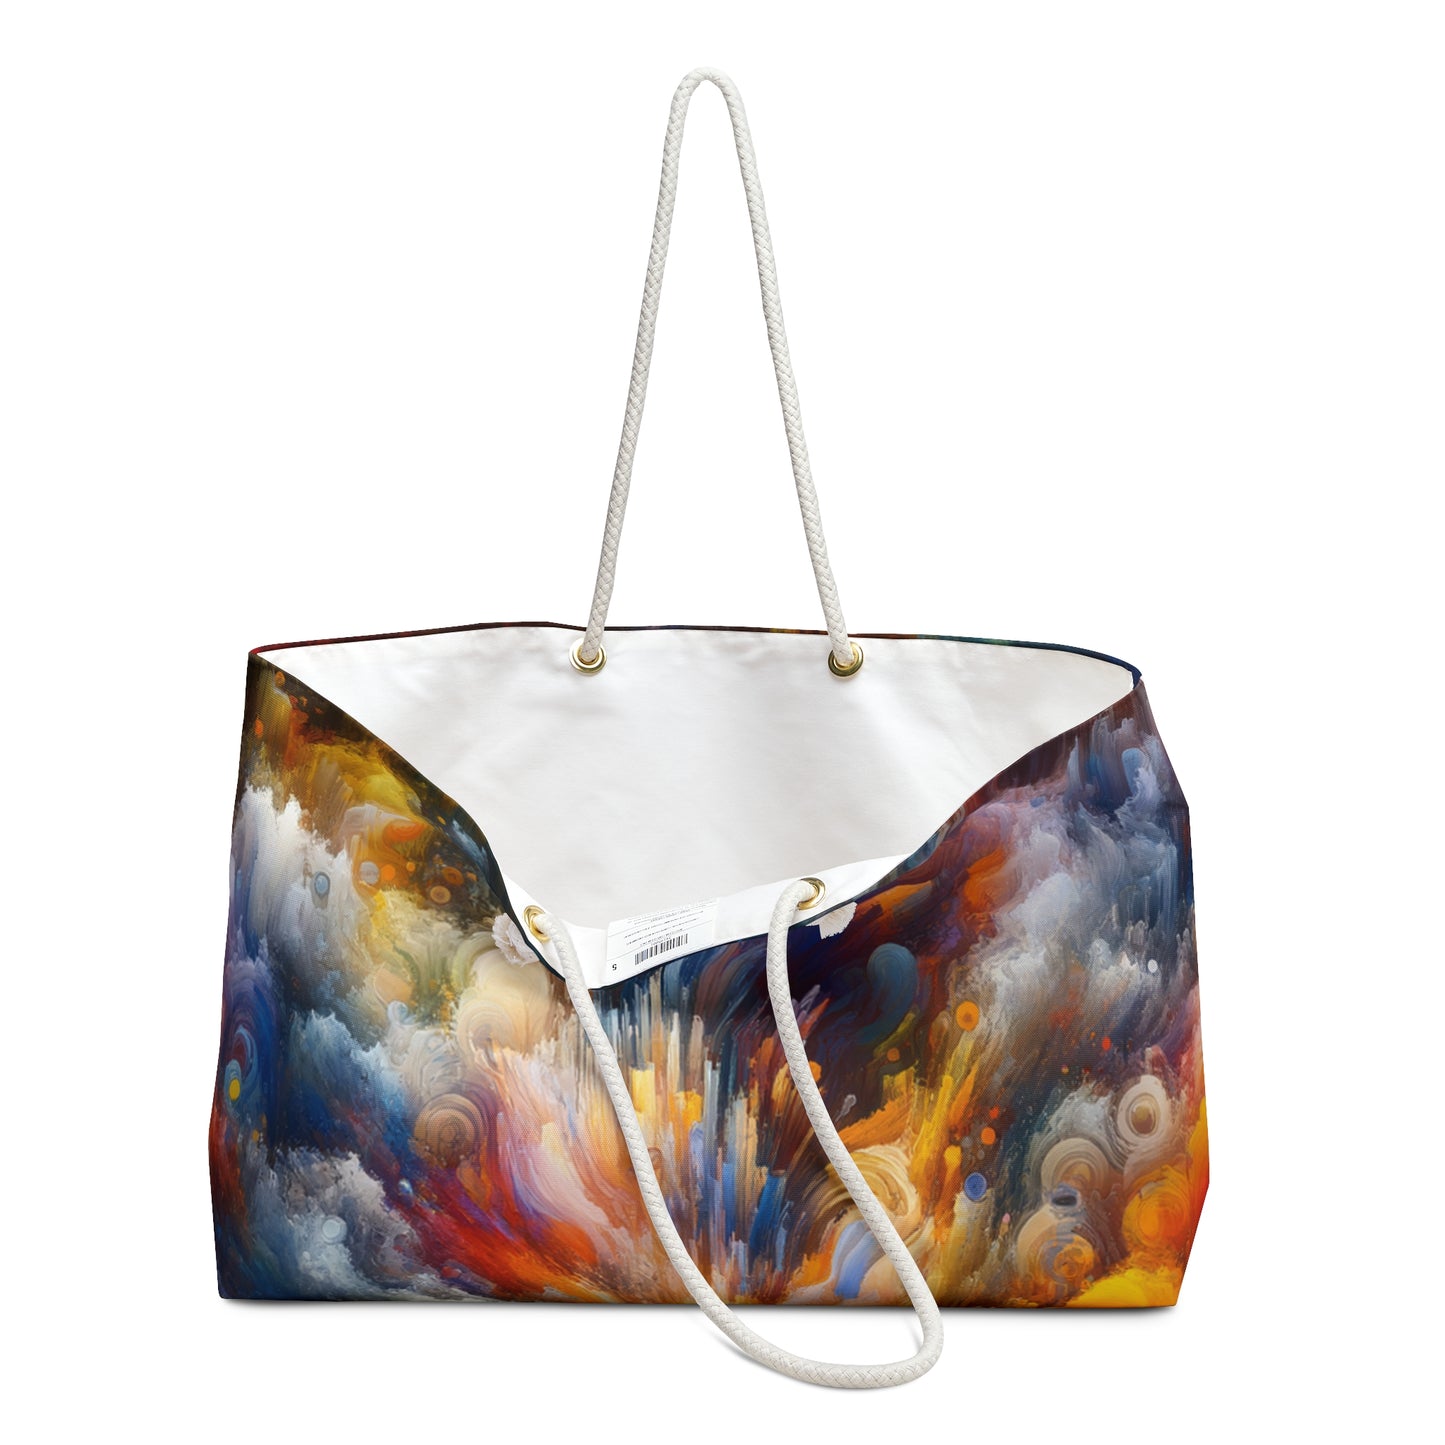 "Chaos vibrant". - Le sac Alien Weekender Style expressionnisme abstrait